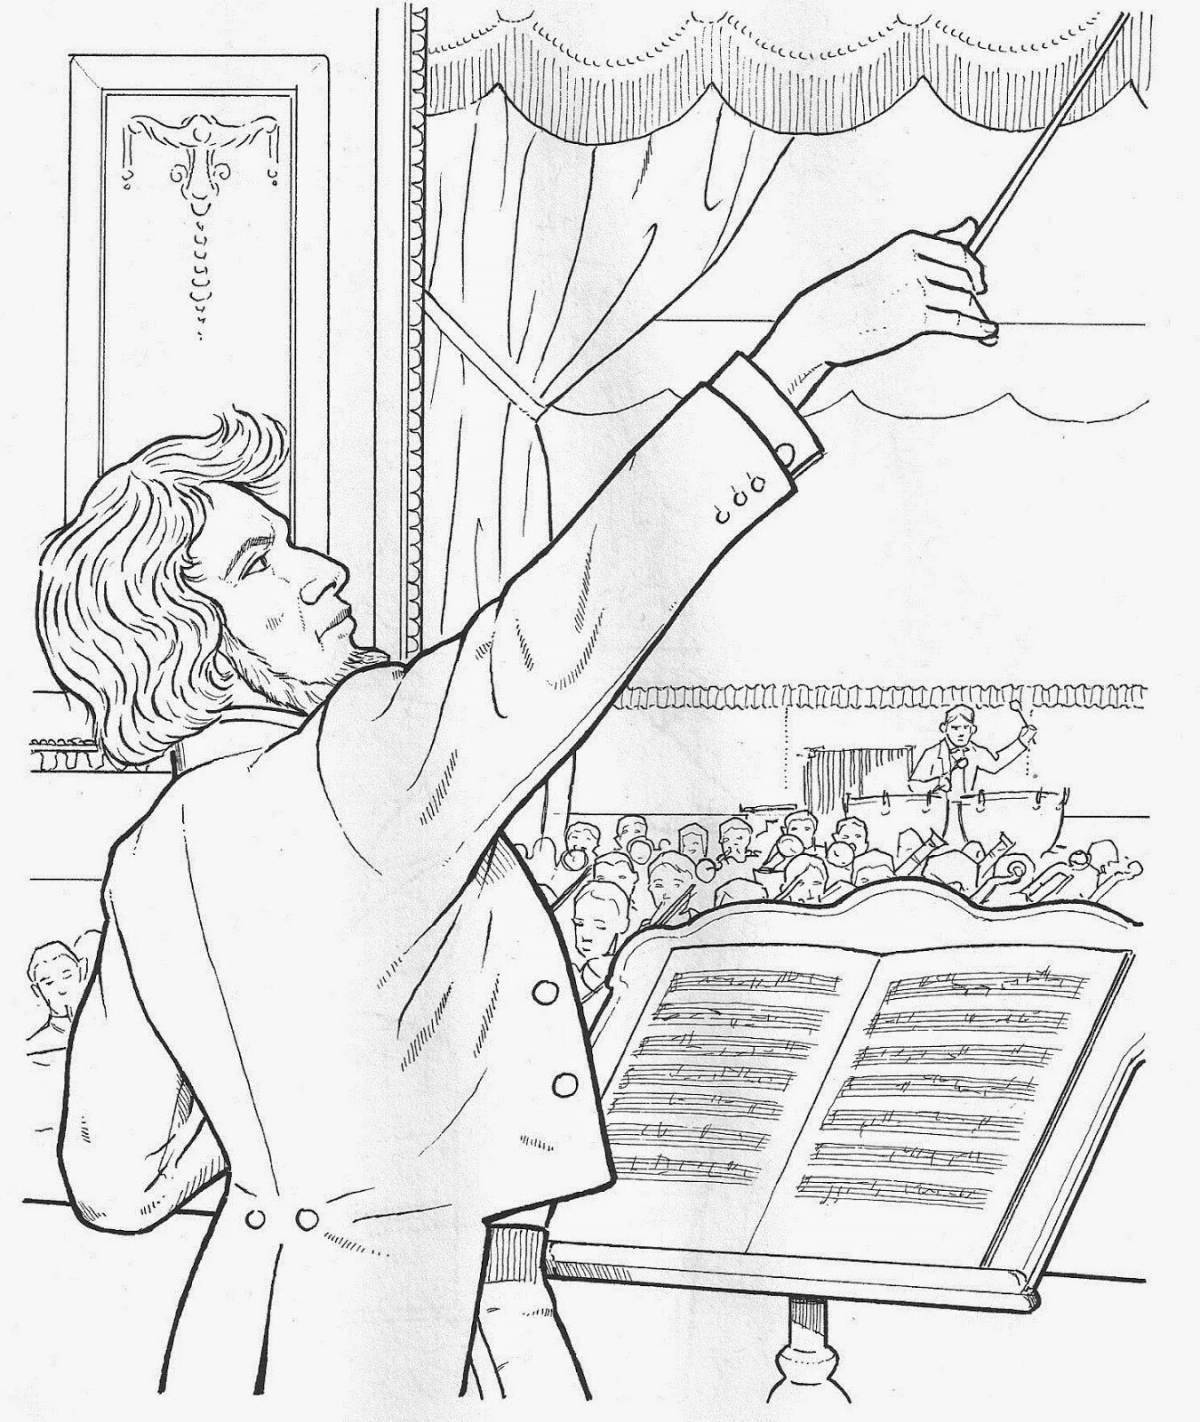 Inspirational conductor coloring book for kids